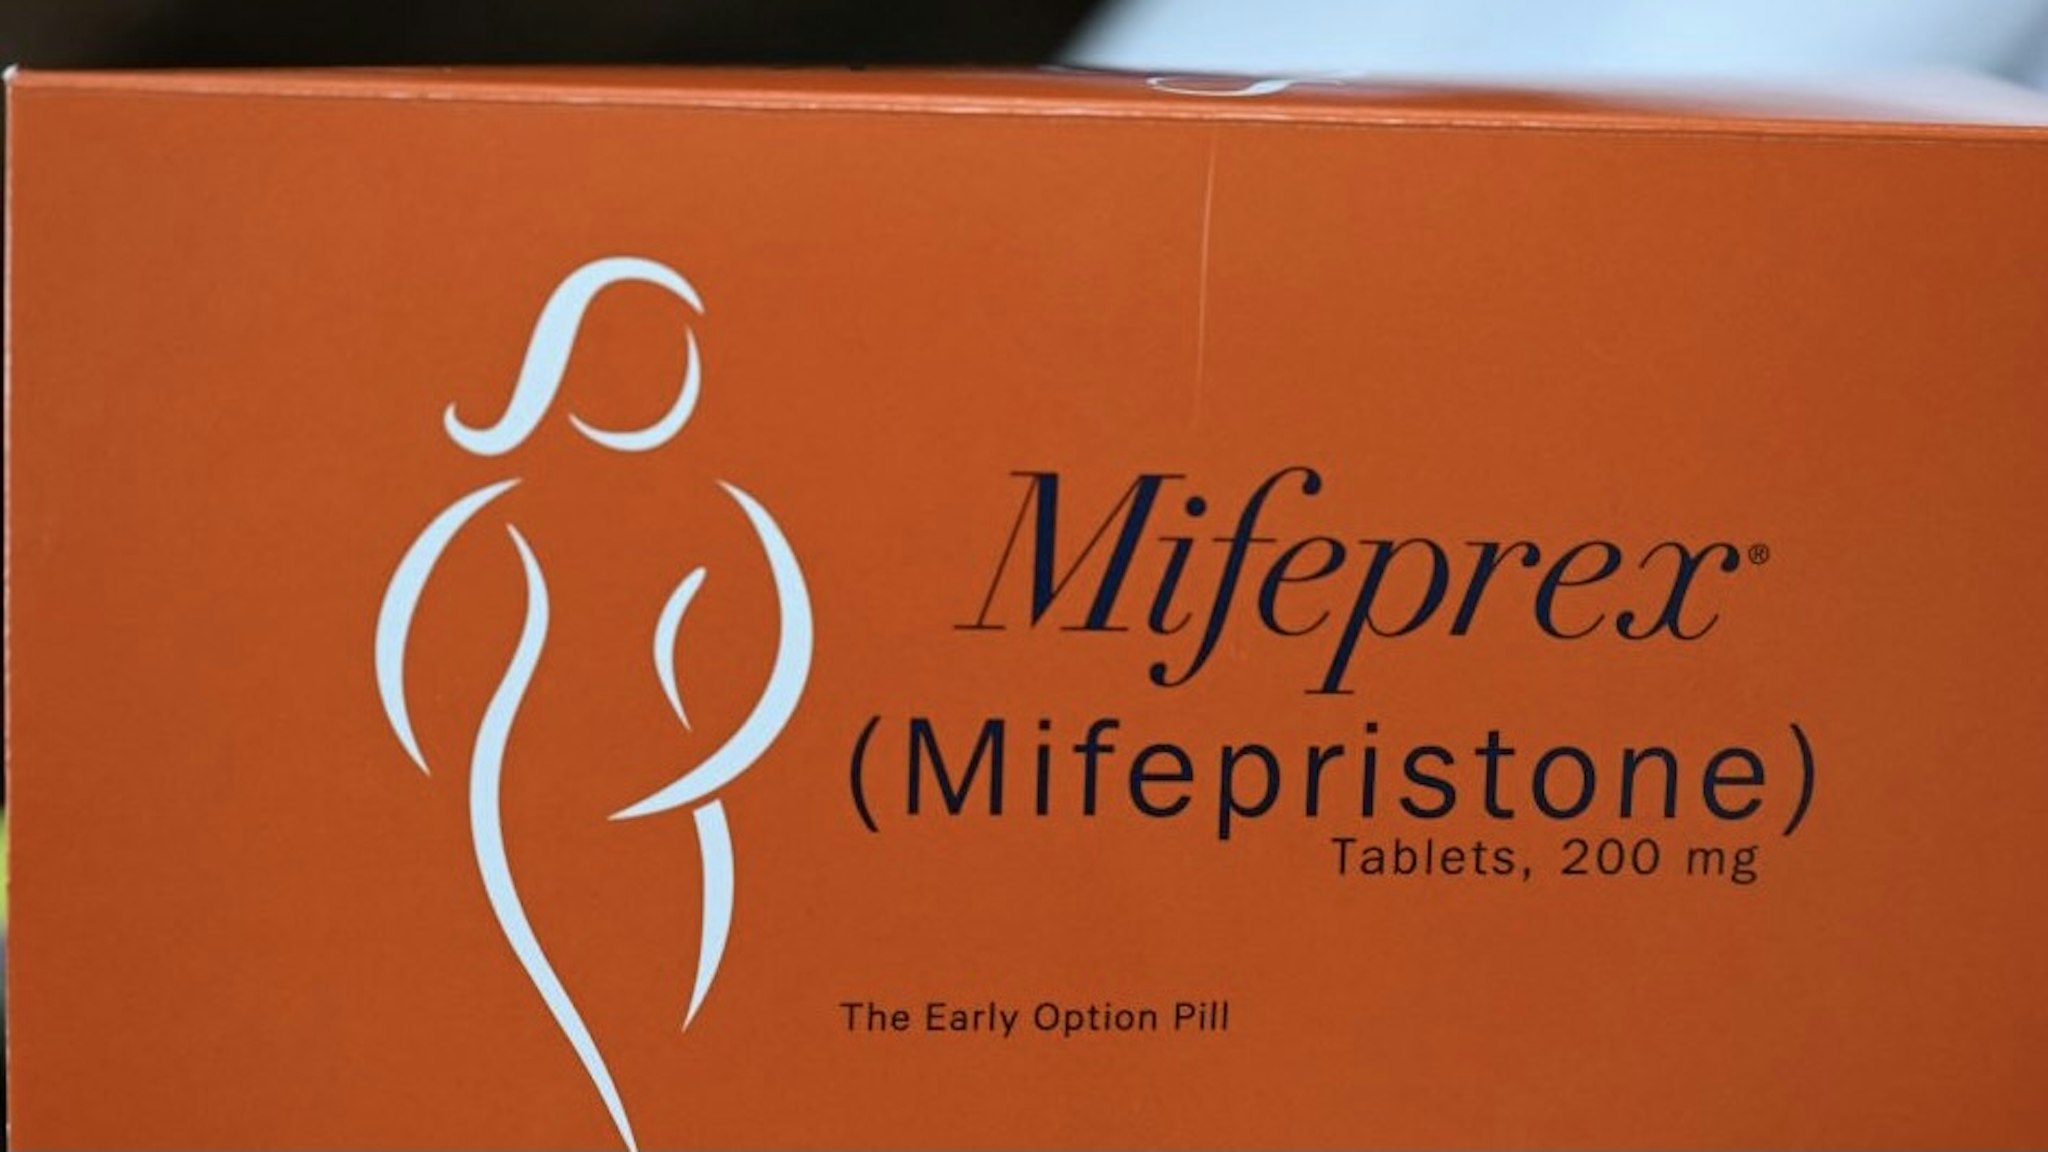 US-ABORTION-TEXAS-NEWMEXICO-CLINIC Mifepristone (Mifeprex), one of the two drugs used in a medication abortion, is displayed at the Women's Reproductive Clinic, which provides legal medication abortion services, in Santa Teresa, New Mexico, on June 15, 2022. Mifepristone is taken first to stop the pregnancy, followed by Misoprostol to induce bleeding. - In the wake of Friday's ruling by the US Supreme Court striking down Roe v Wade and the federally protected right to an abortion, women from Texas and other states are traveling to clinics like the Women's Reproductive Health Clinic in New Mexico for legal abortion services under the state's more liberal laws. - RESTRICTED TO EDITORIAL USE (Photo by Robyn Beck / AFP) / RESTRICTED TO EDITORIAL USE (Photo by ROBYN BECK/AFP via Getty Images) ROBYN BECK / Contributor